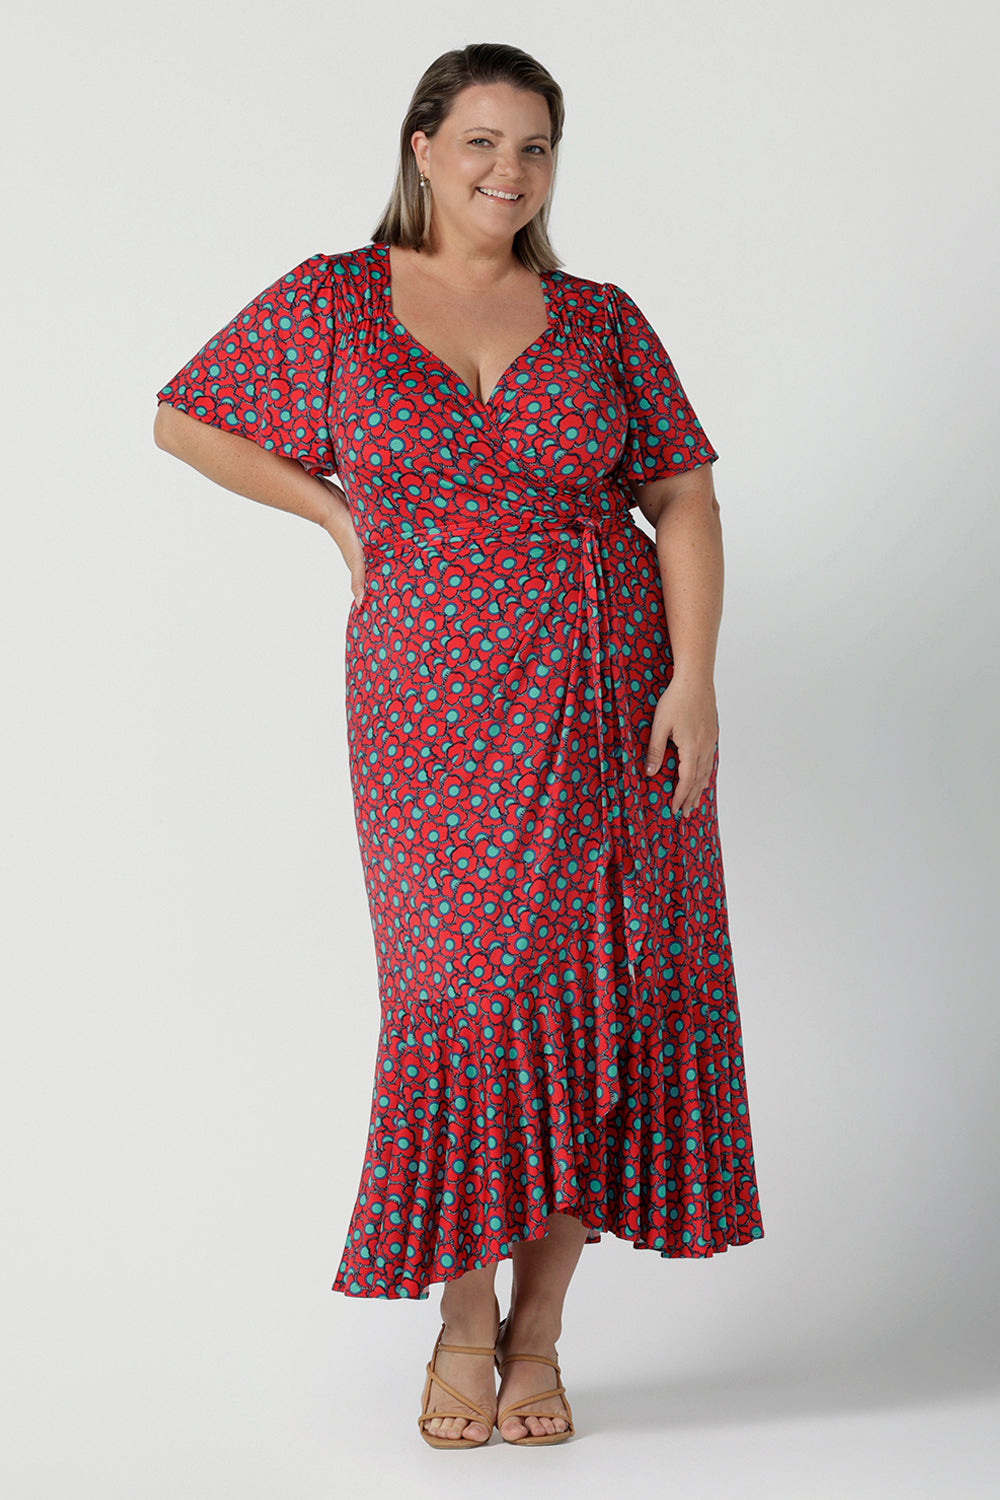 Women's Wrap dress in soft slinky jersey. The beautiful Rio print has seventies inspired florals with aqua.Romantic valentines day dressing, frill hem and flutter sleeve for curvy women size 8 - 24.